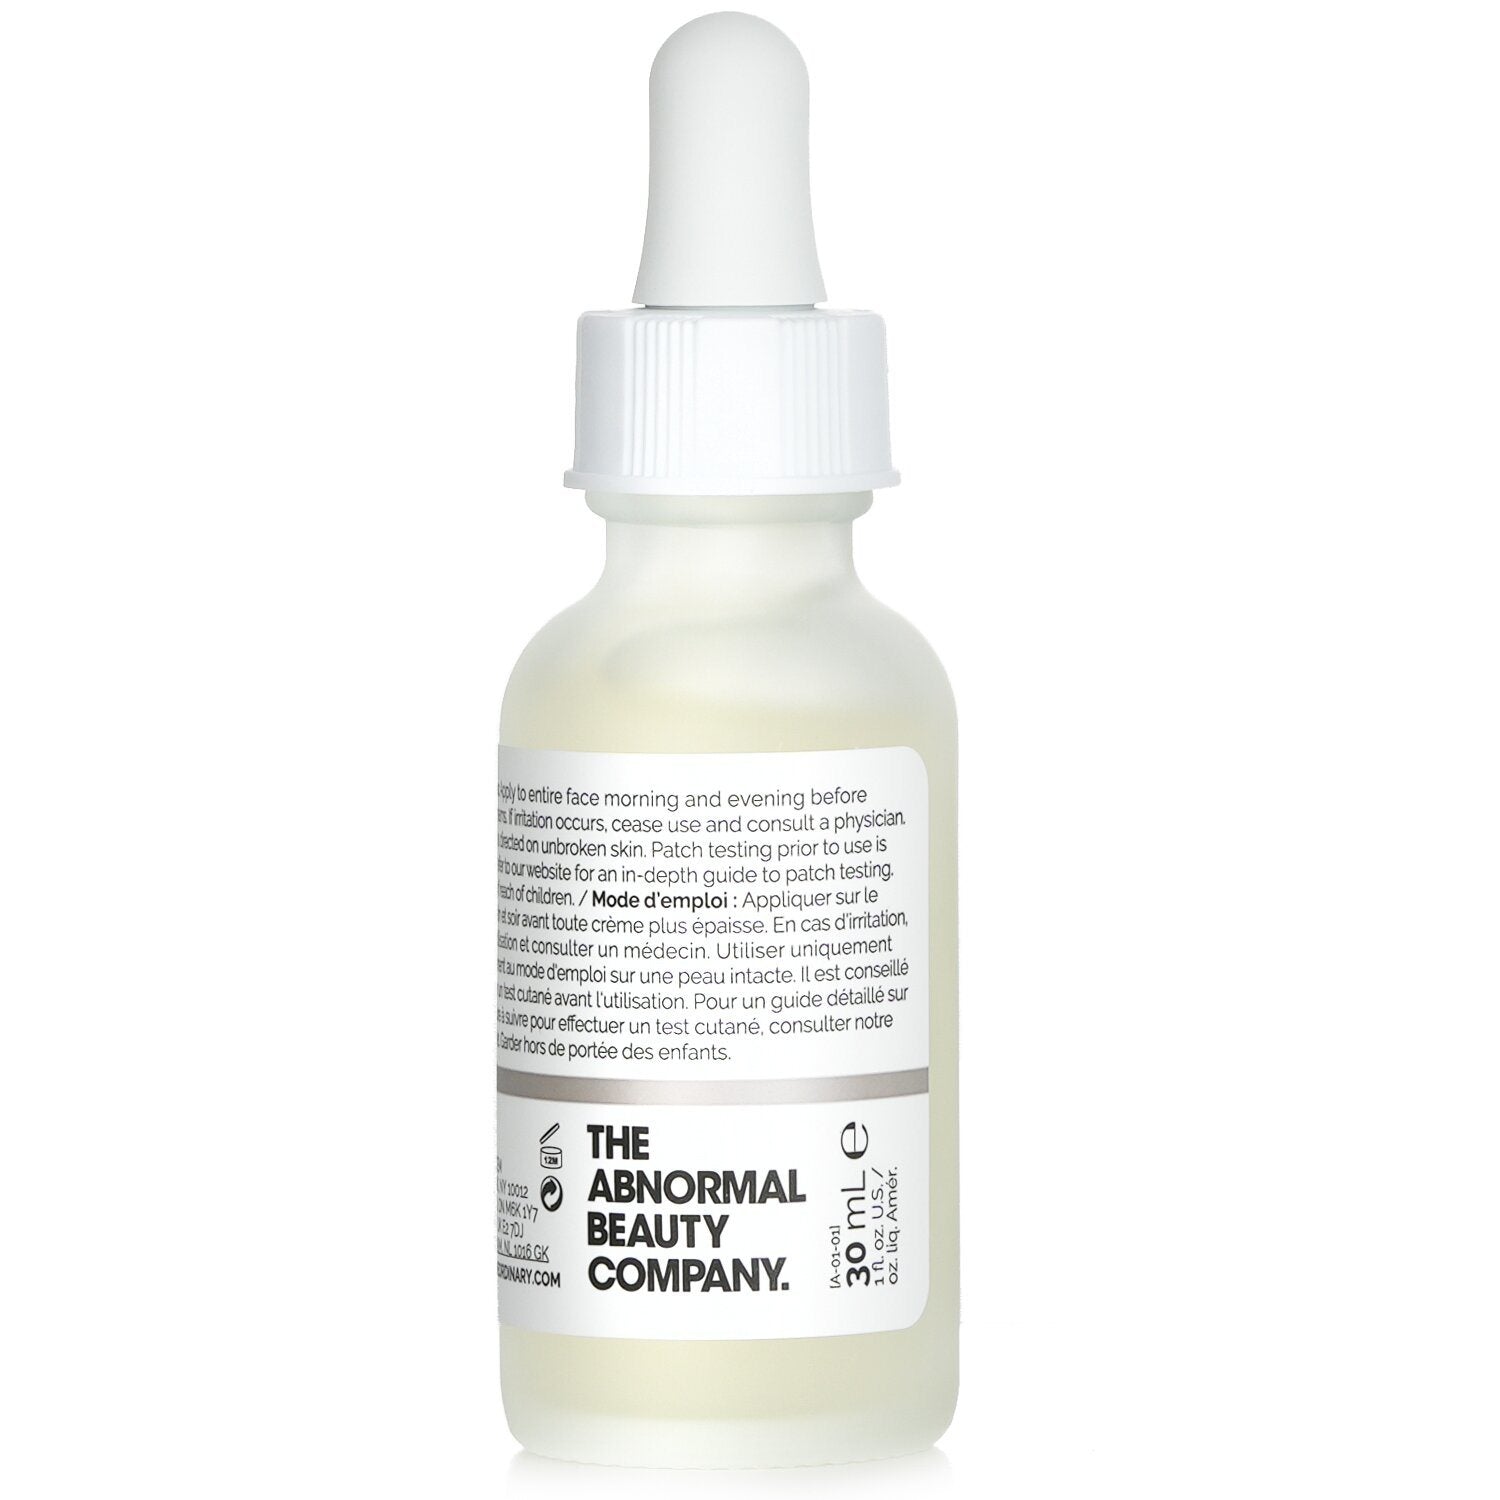 A bottle of THE ORDINARY - Niacinamide 10% + Zinc 1% 10028 / 190311 30ml/1oz serum on a white background.